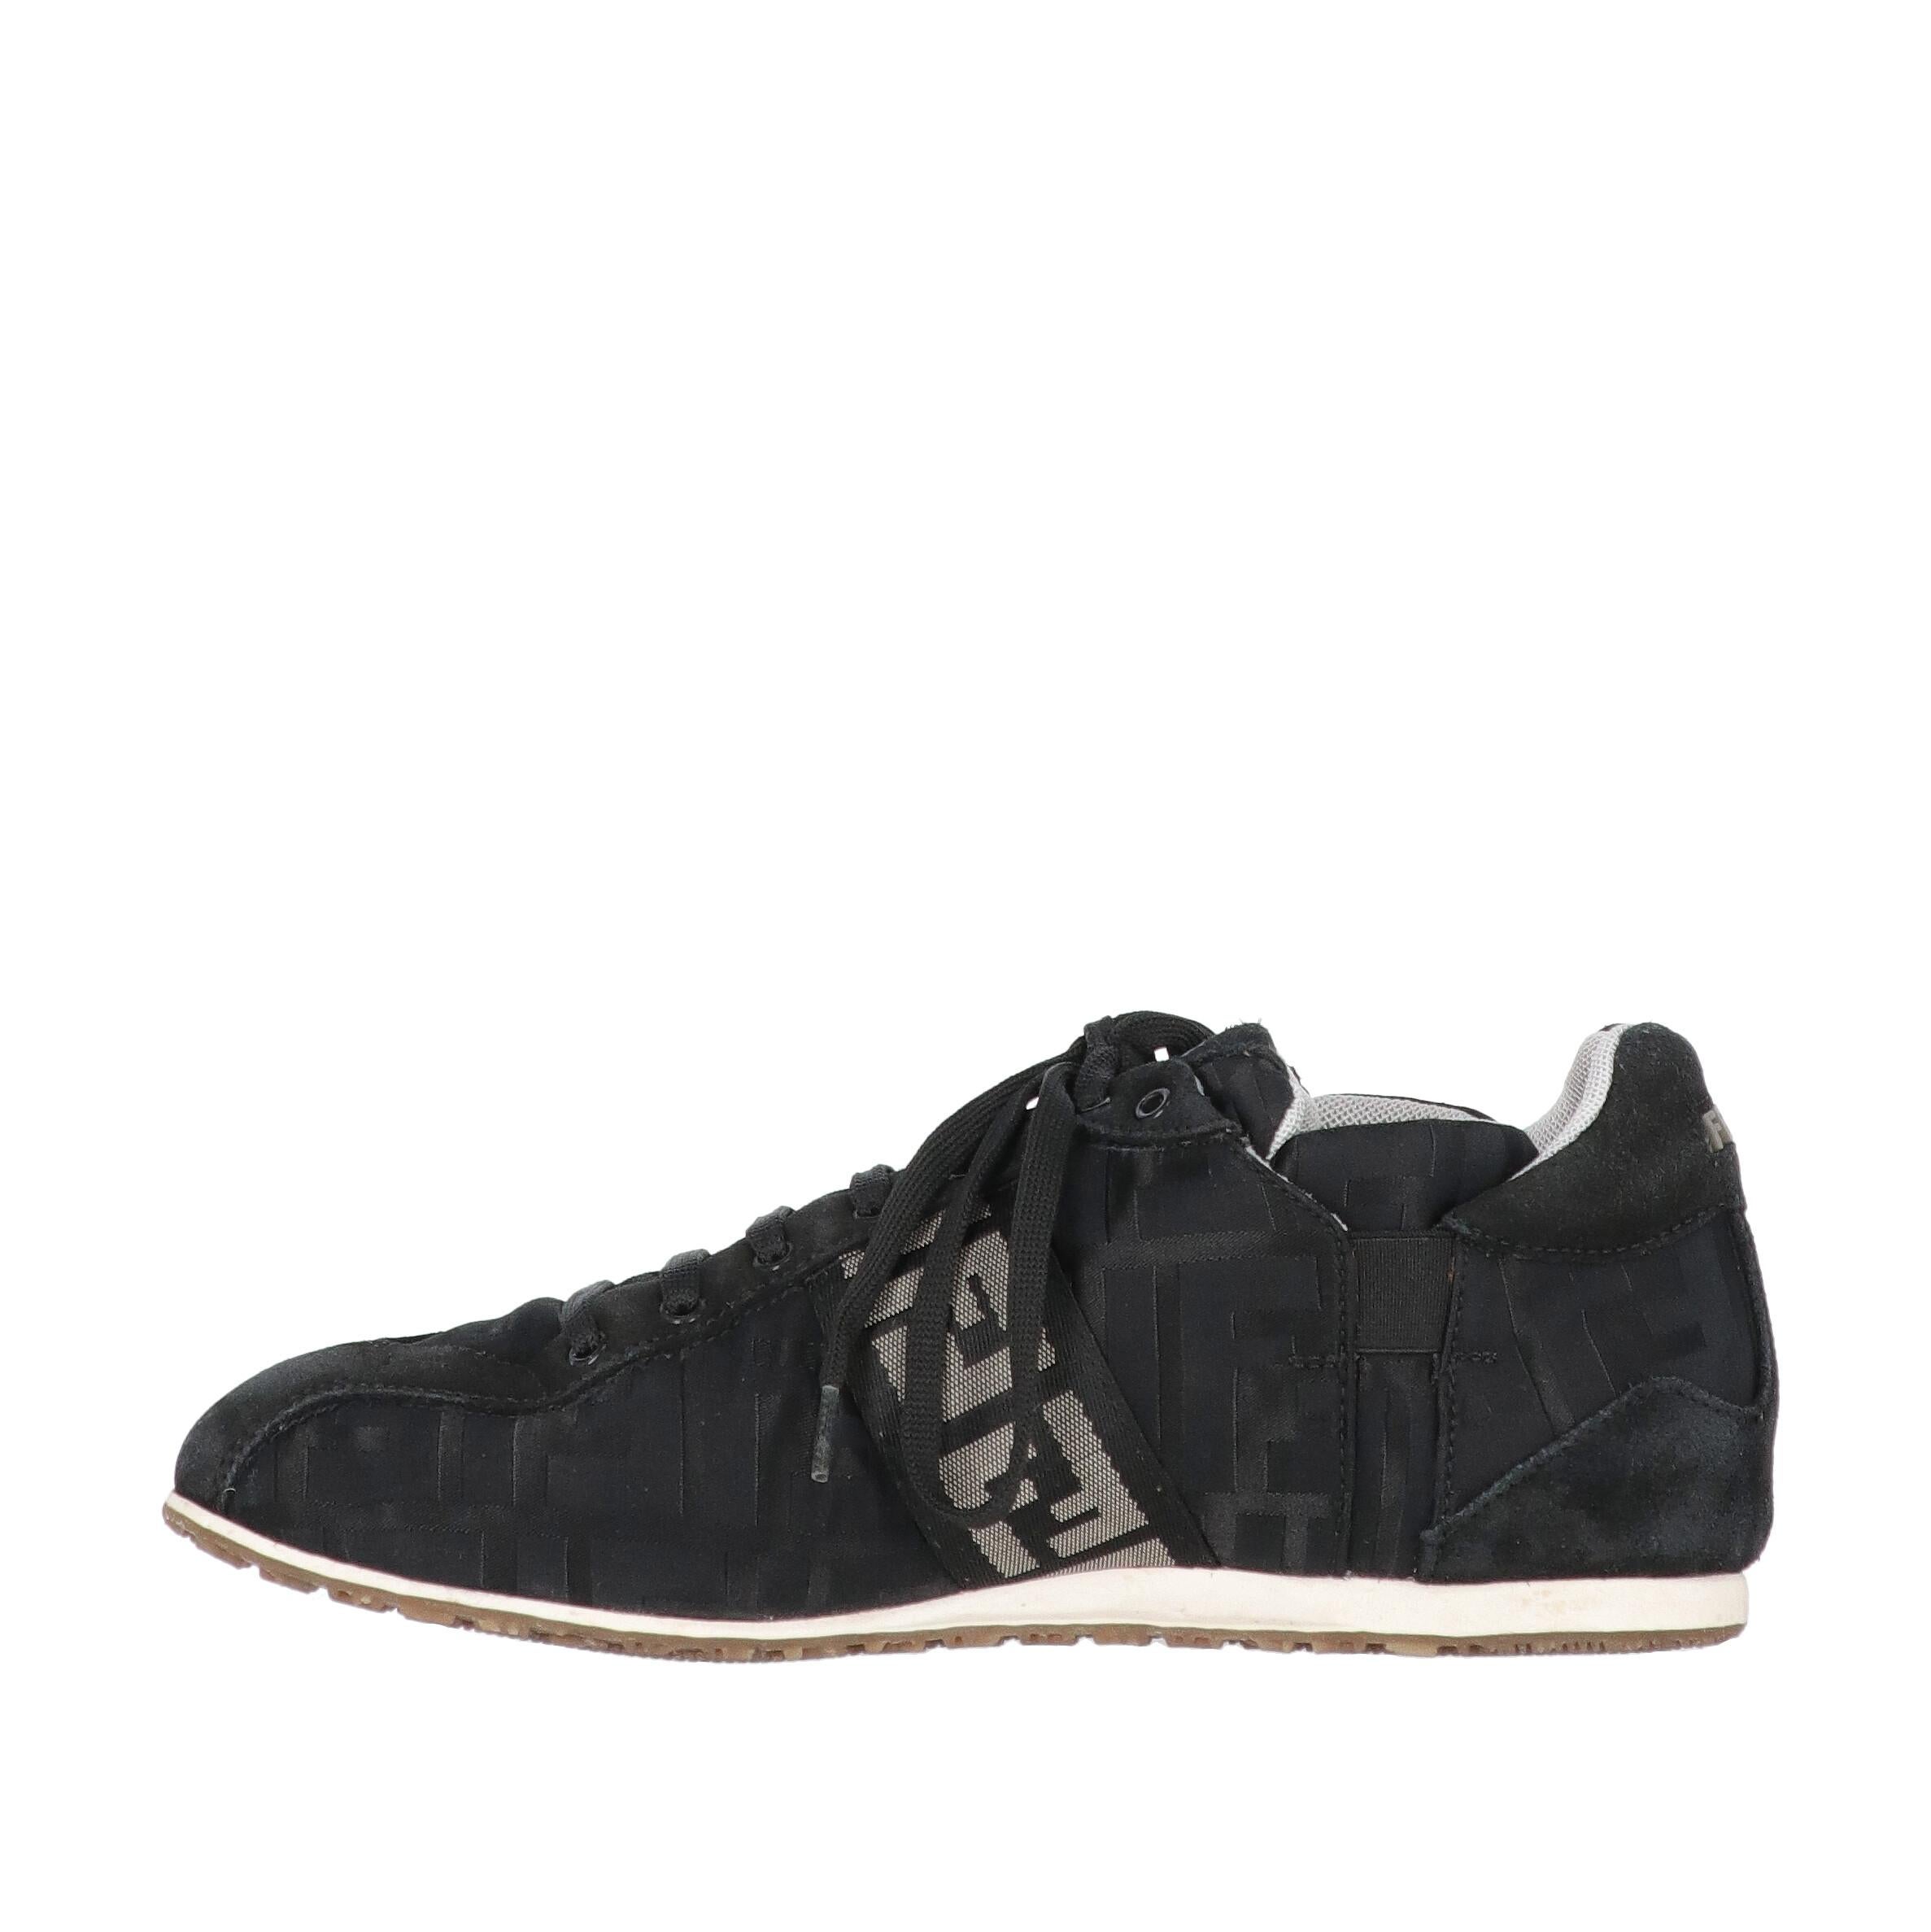 Fendi black monogram pumpkin fabric lace-up shoes with suede details. Round toe, two side logoed bands and rubber sole.
The shoes show signs of wear on the suede and the sole, as shown in the pictures.

Years: 2000s

Made in Italy
Size: 37